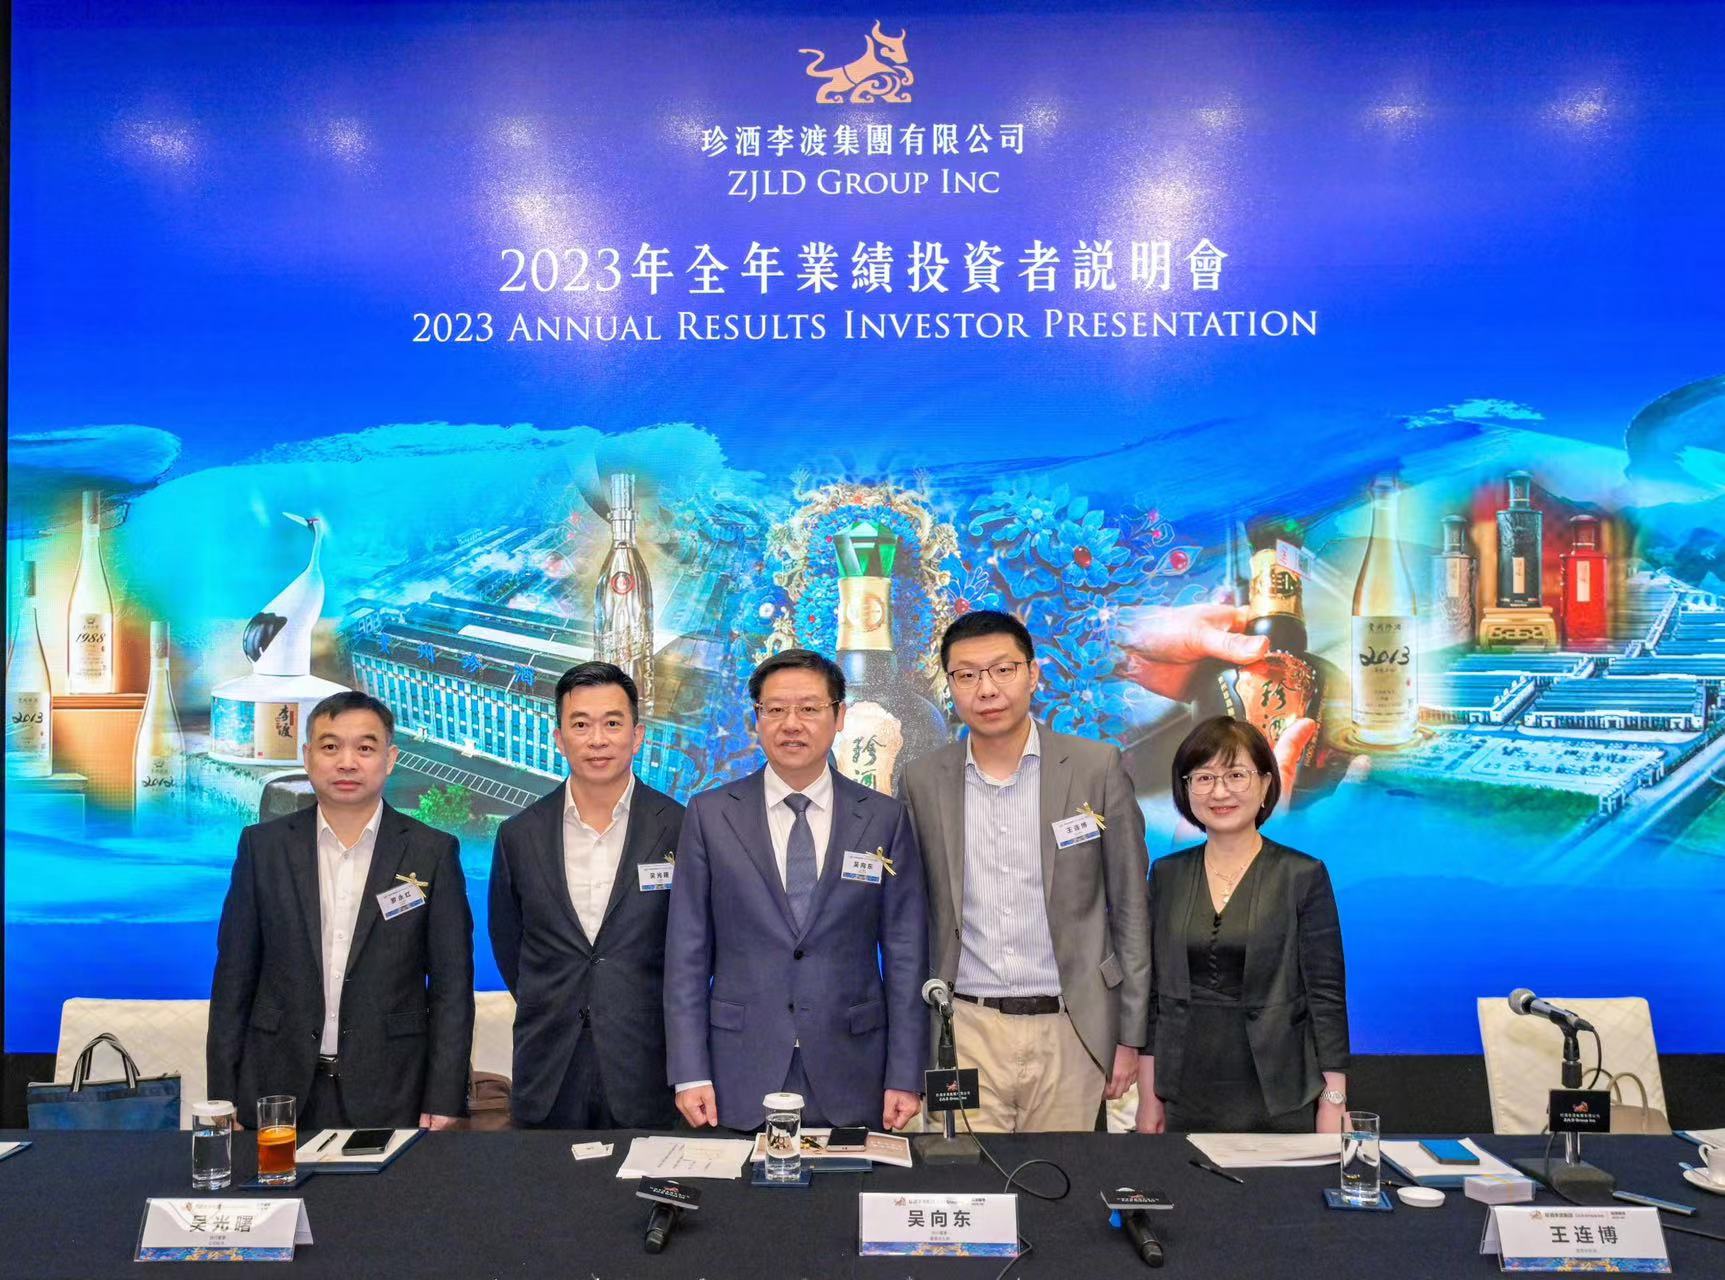 From left to right: Mr. LUO Yonghong, Executive Director and Vice President of ZJLD Group; Mr. NG Kwong Chue Paul, Executive Director and Company Secretary of ZJLD Group; Mr. WU Xiangdong, Executive Director and Chairman of the Board of ZJLD Group; Mr. WANG Lianbo, Vice President and Chief Financial Officer; Ms. ZHU Lin, Executive Director and Vice President of ZJLD Group.